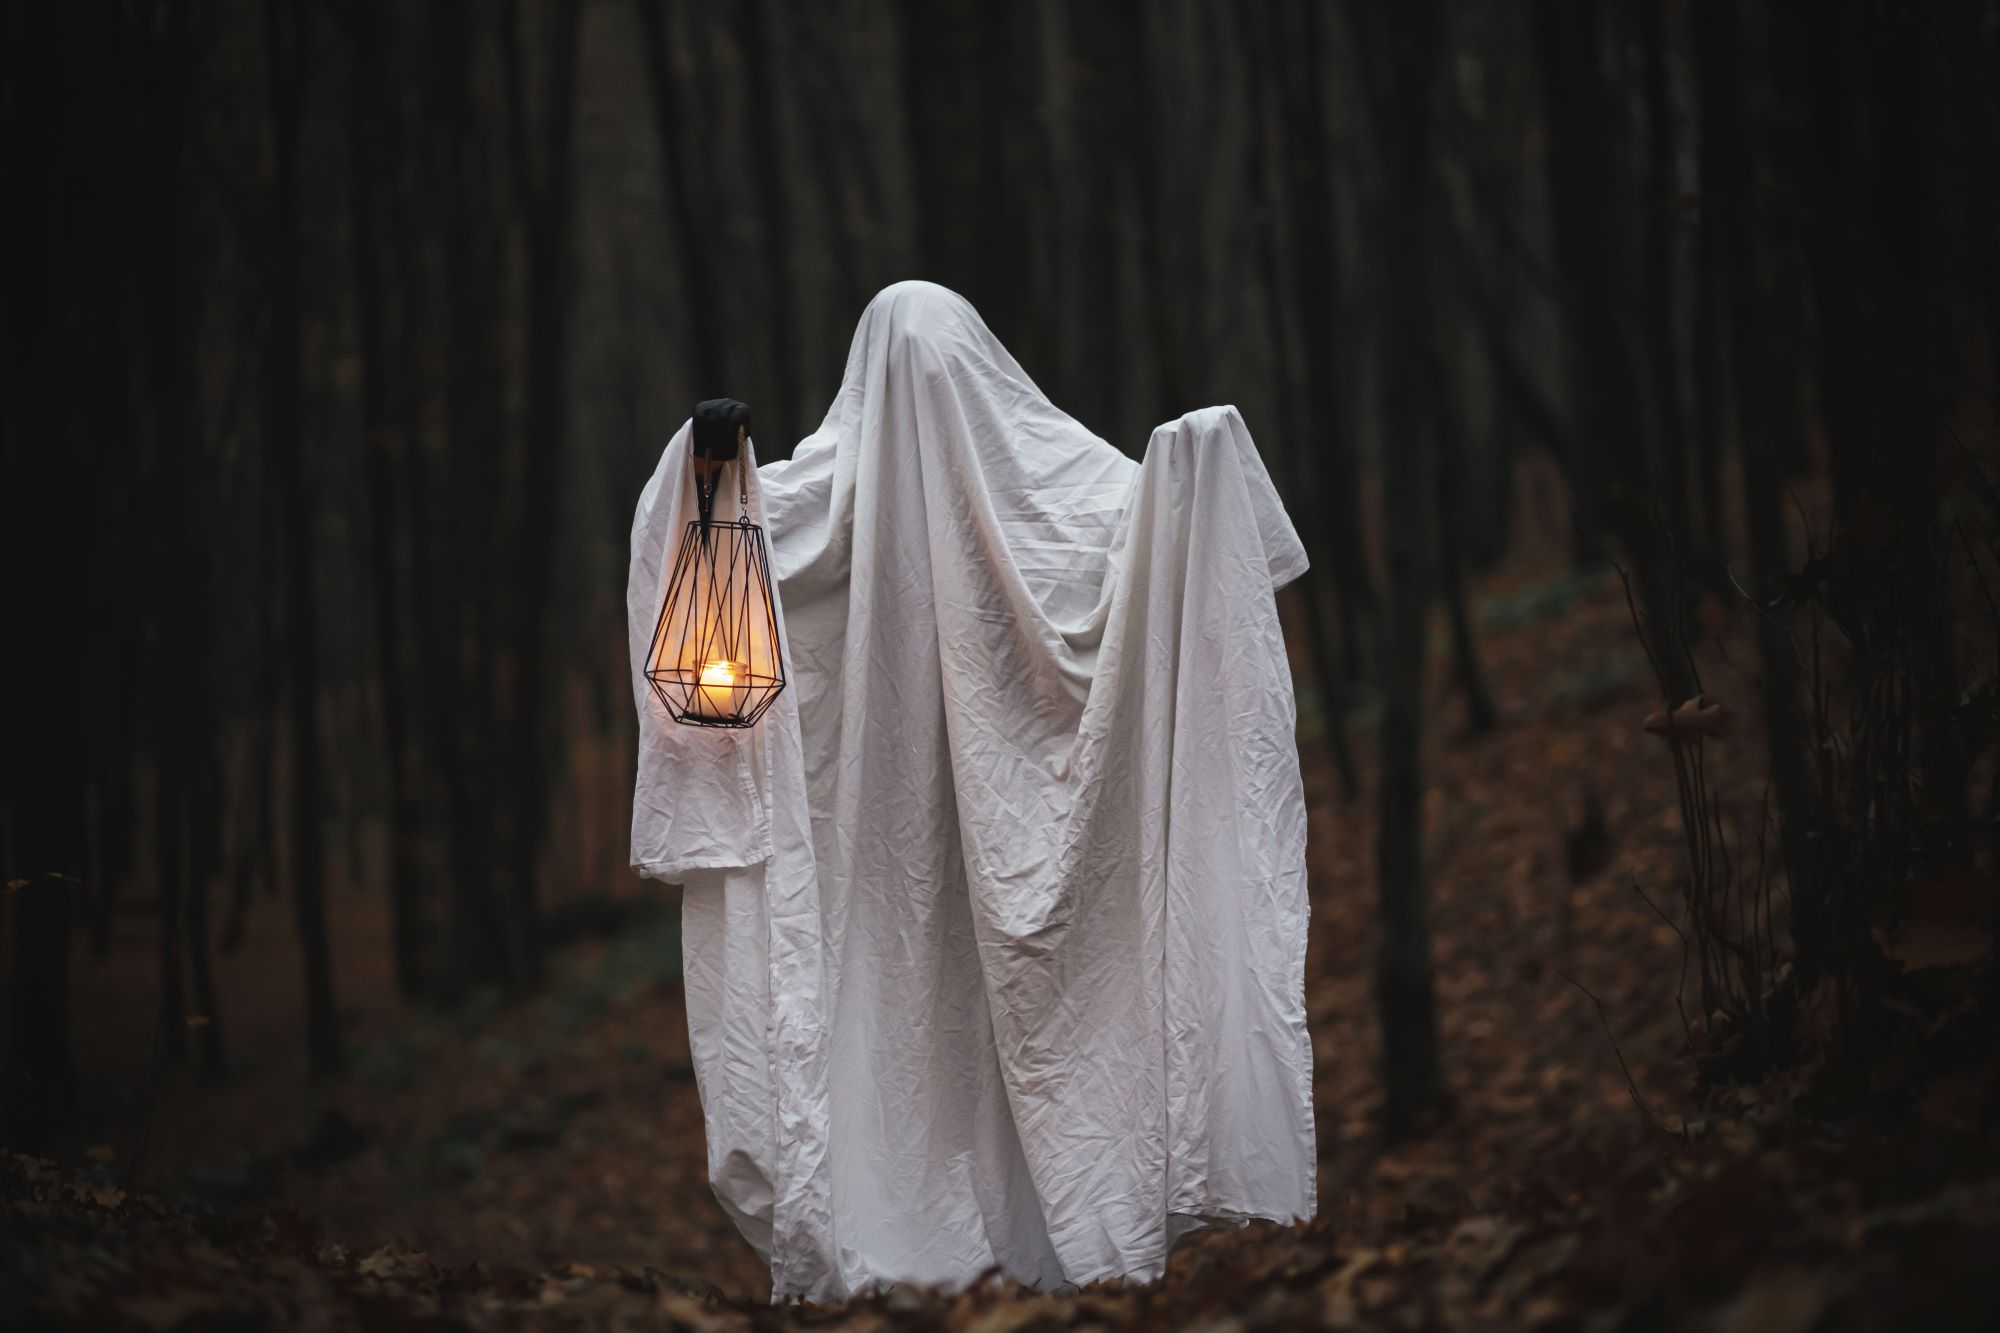 spooky ghost carrying a lantern